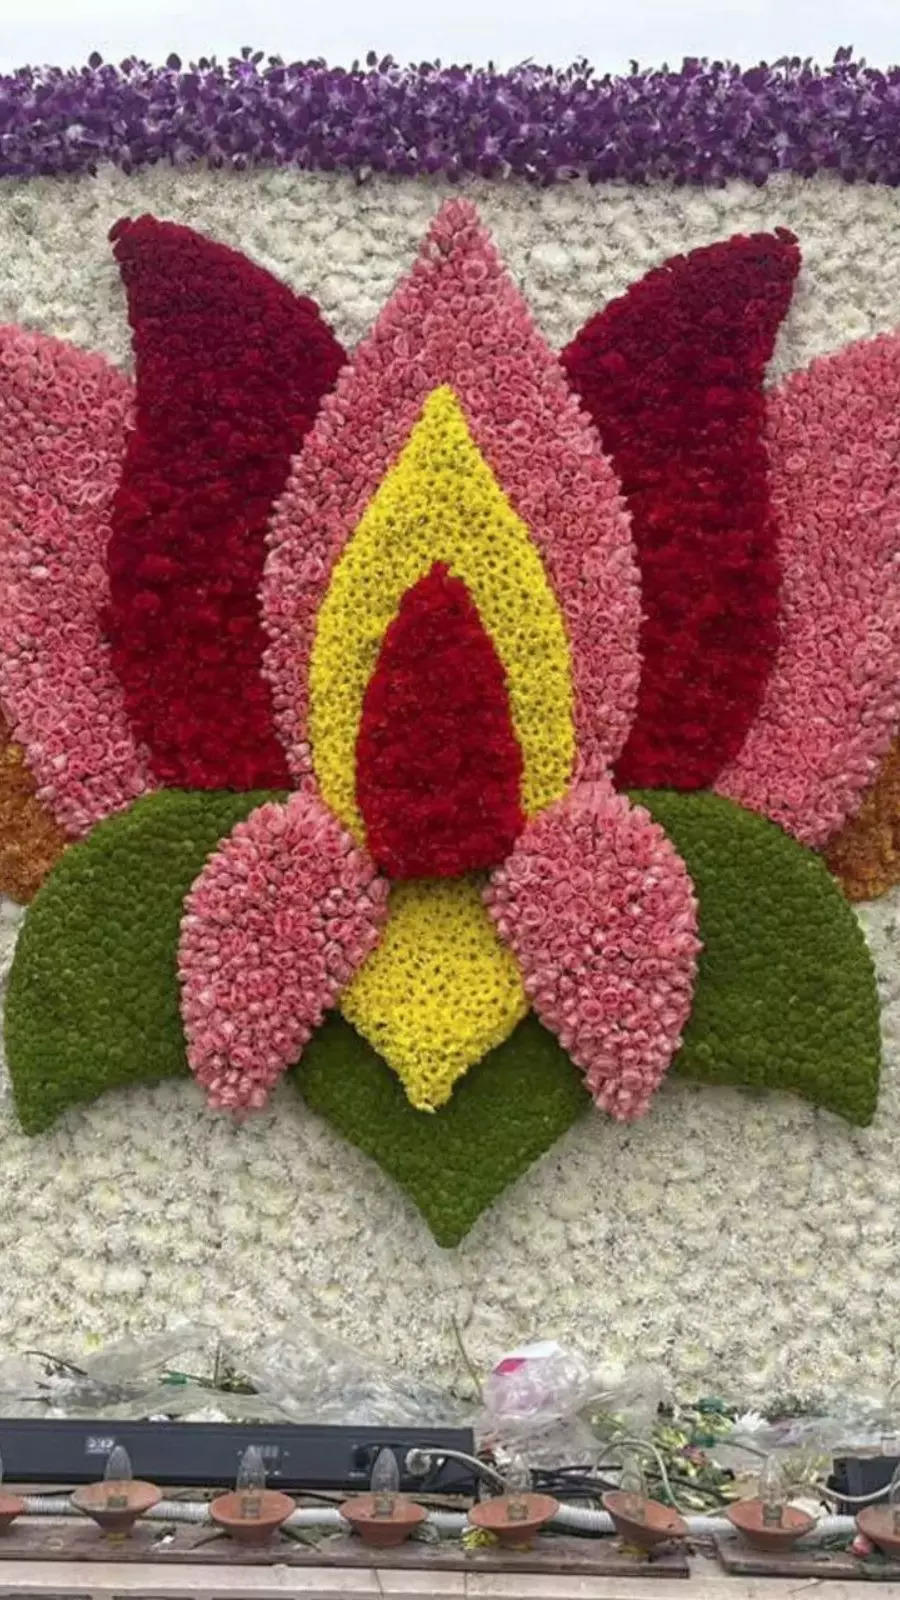 Sacred flowers to offer to Lord Ram during Pran Pratishtha and beyond 